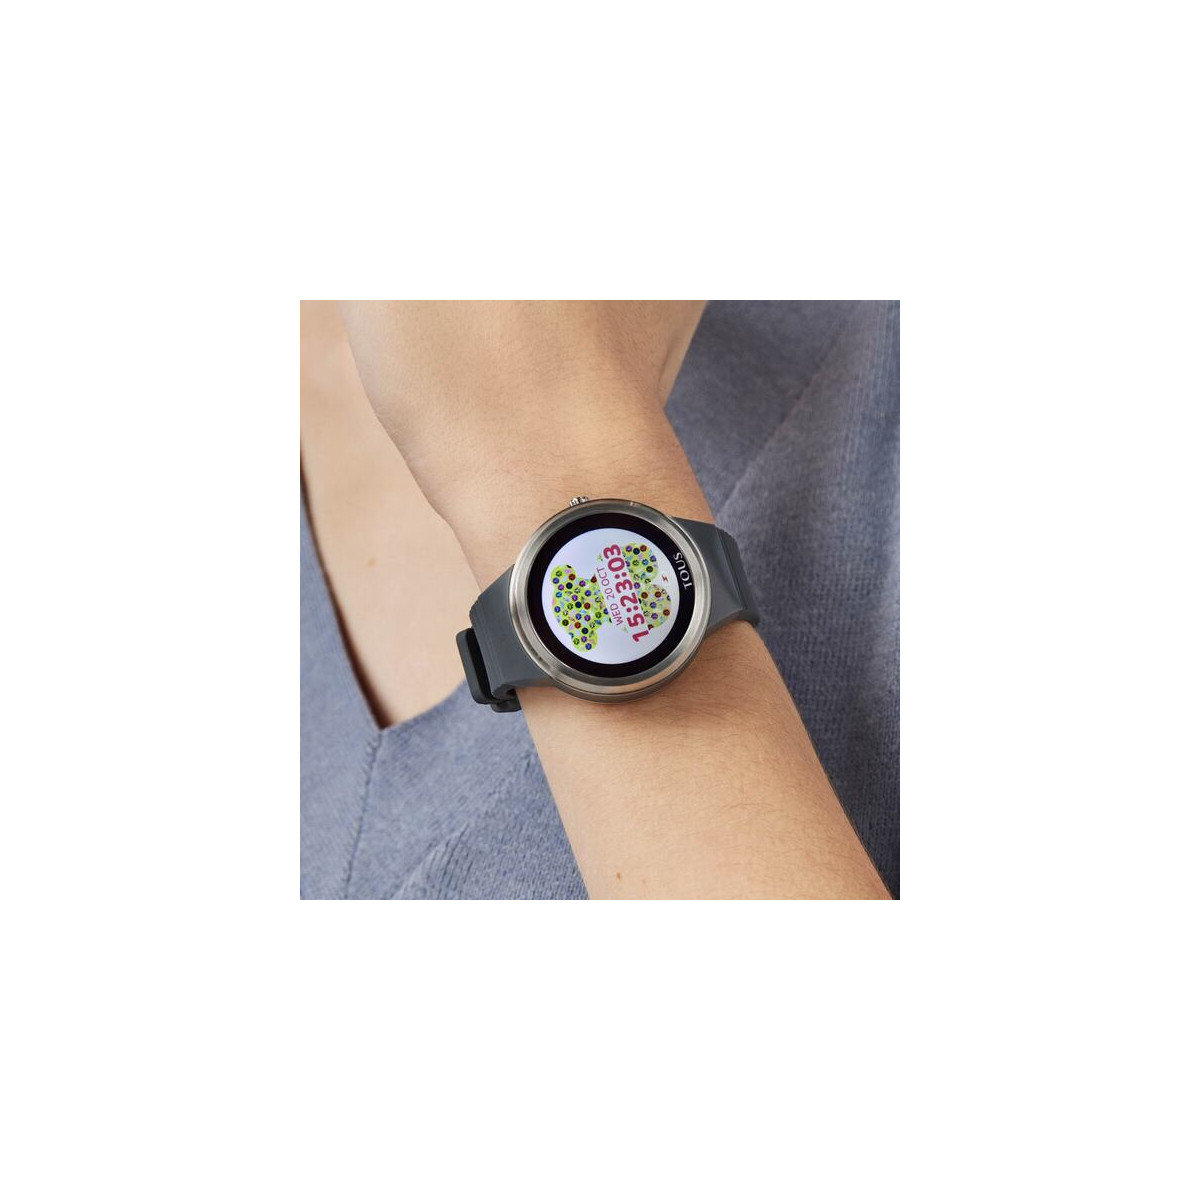 Reloj Tous Mujer Rond Touch Connect Gris